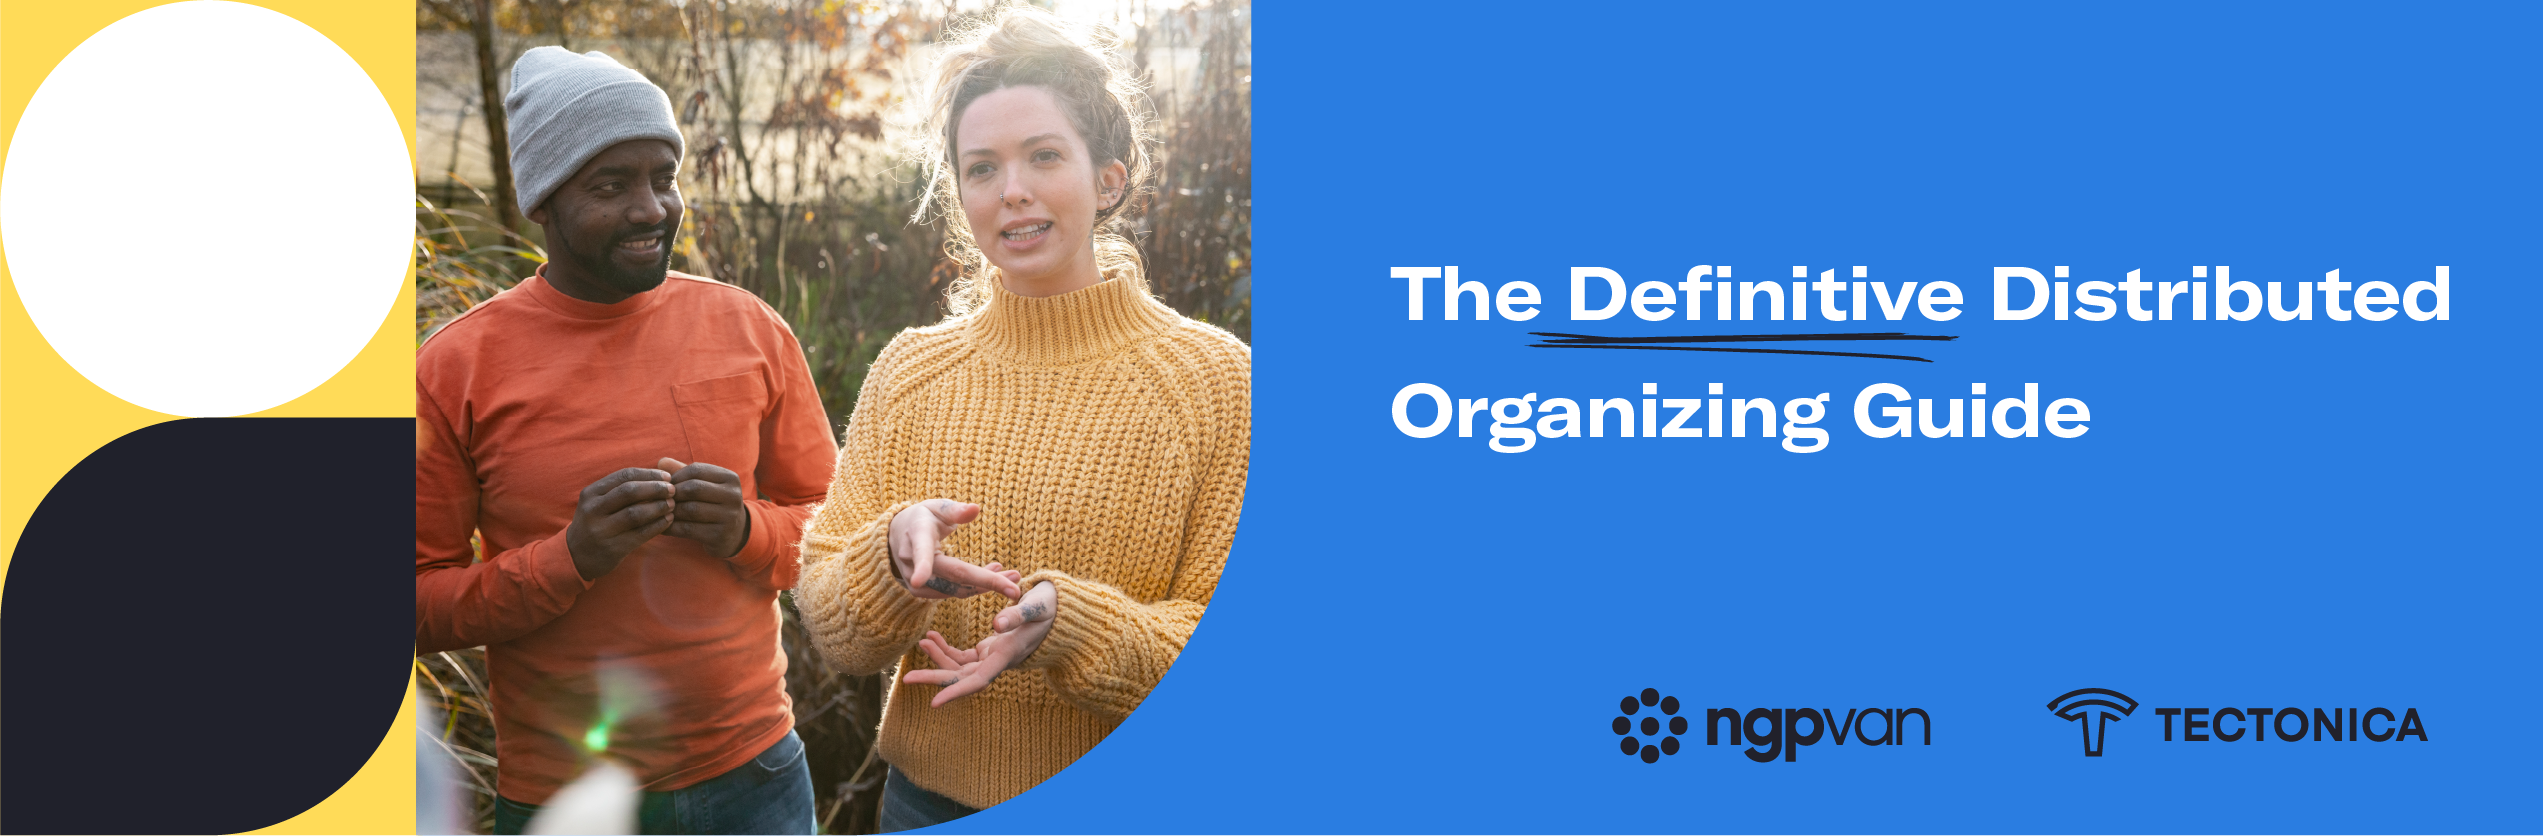 Download the Definitive Distributed Organizing Guide